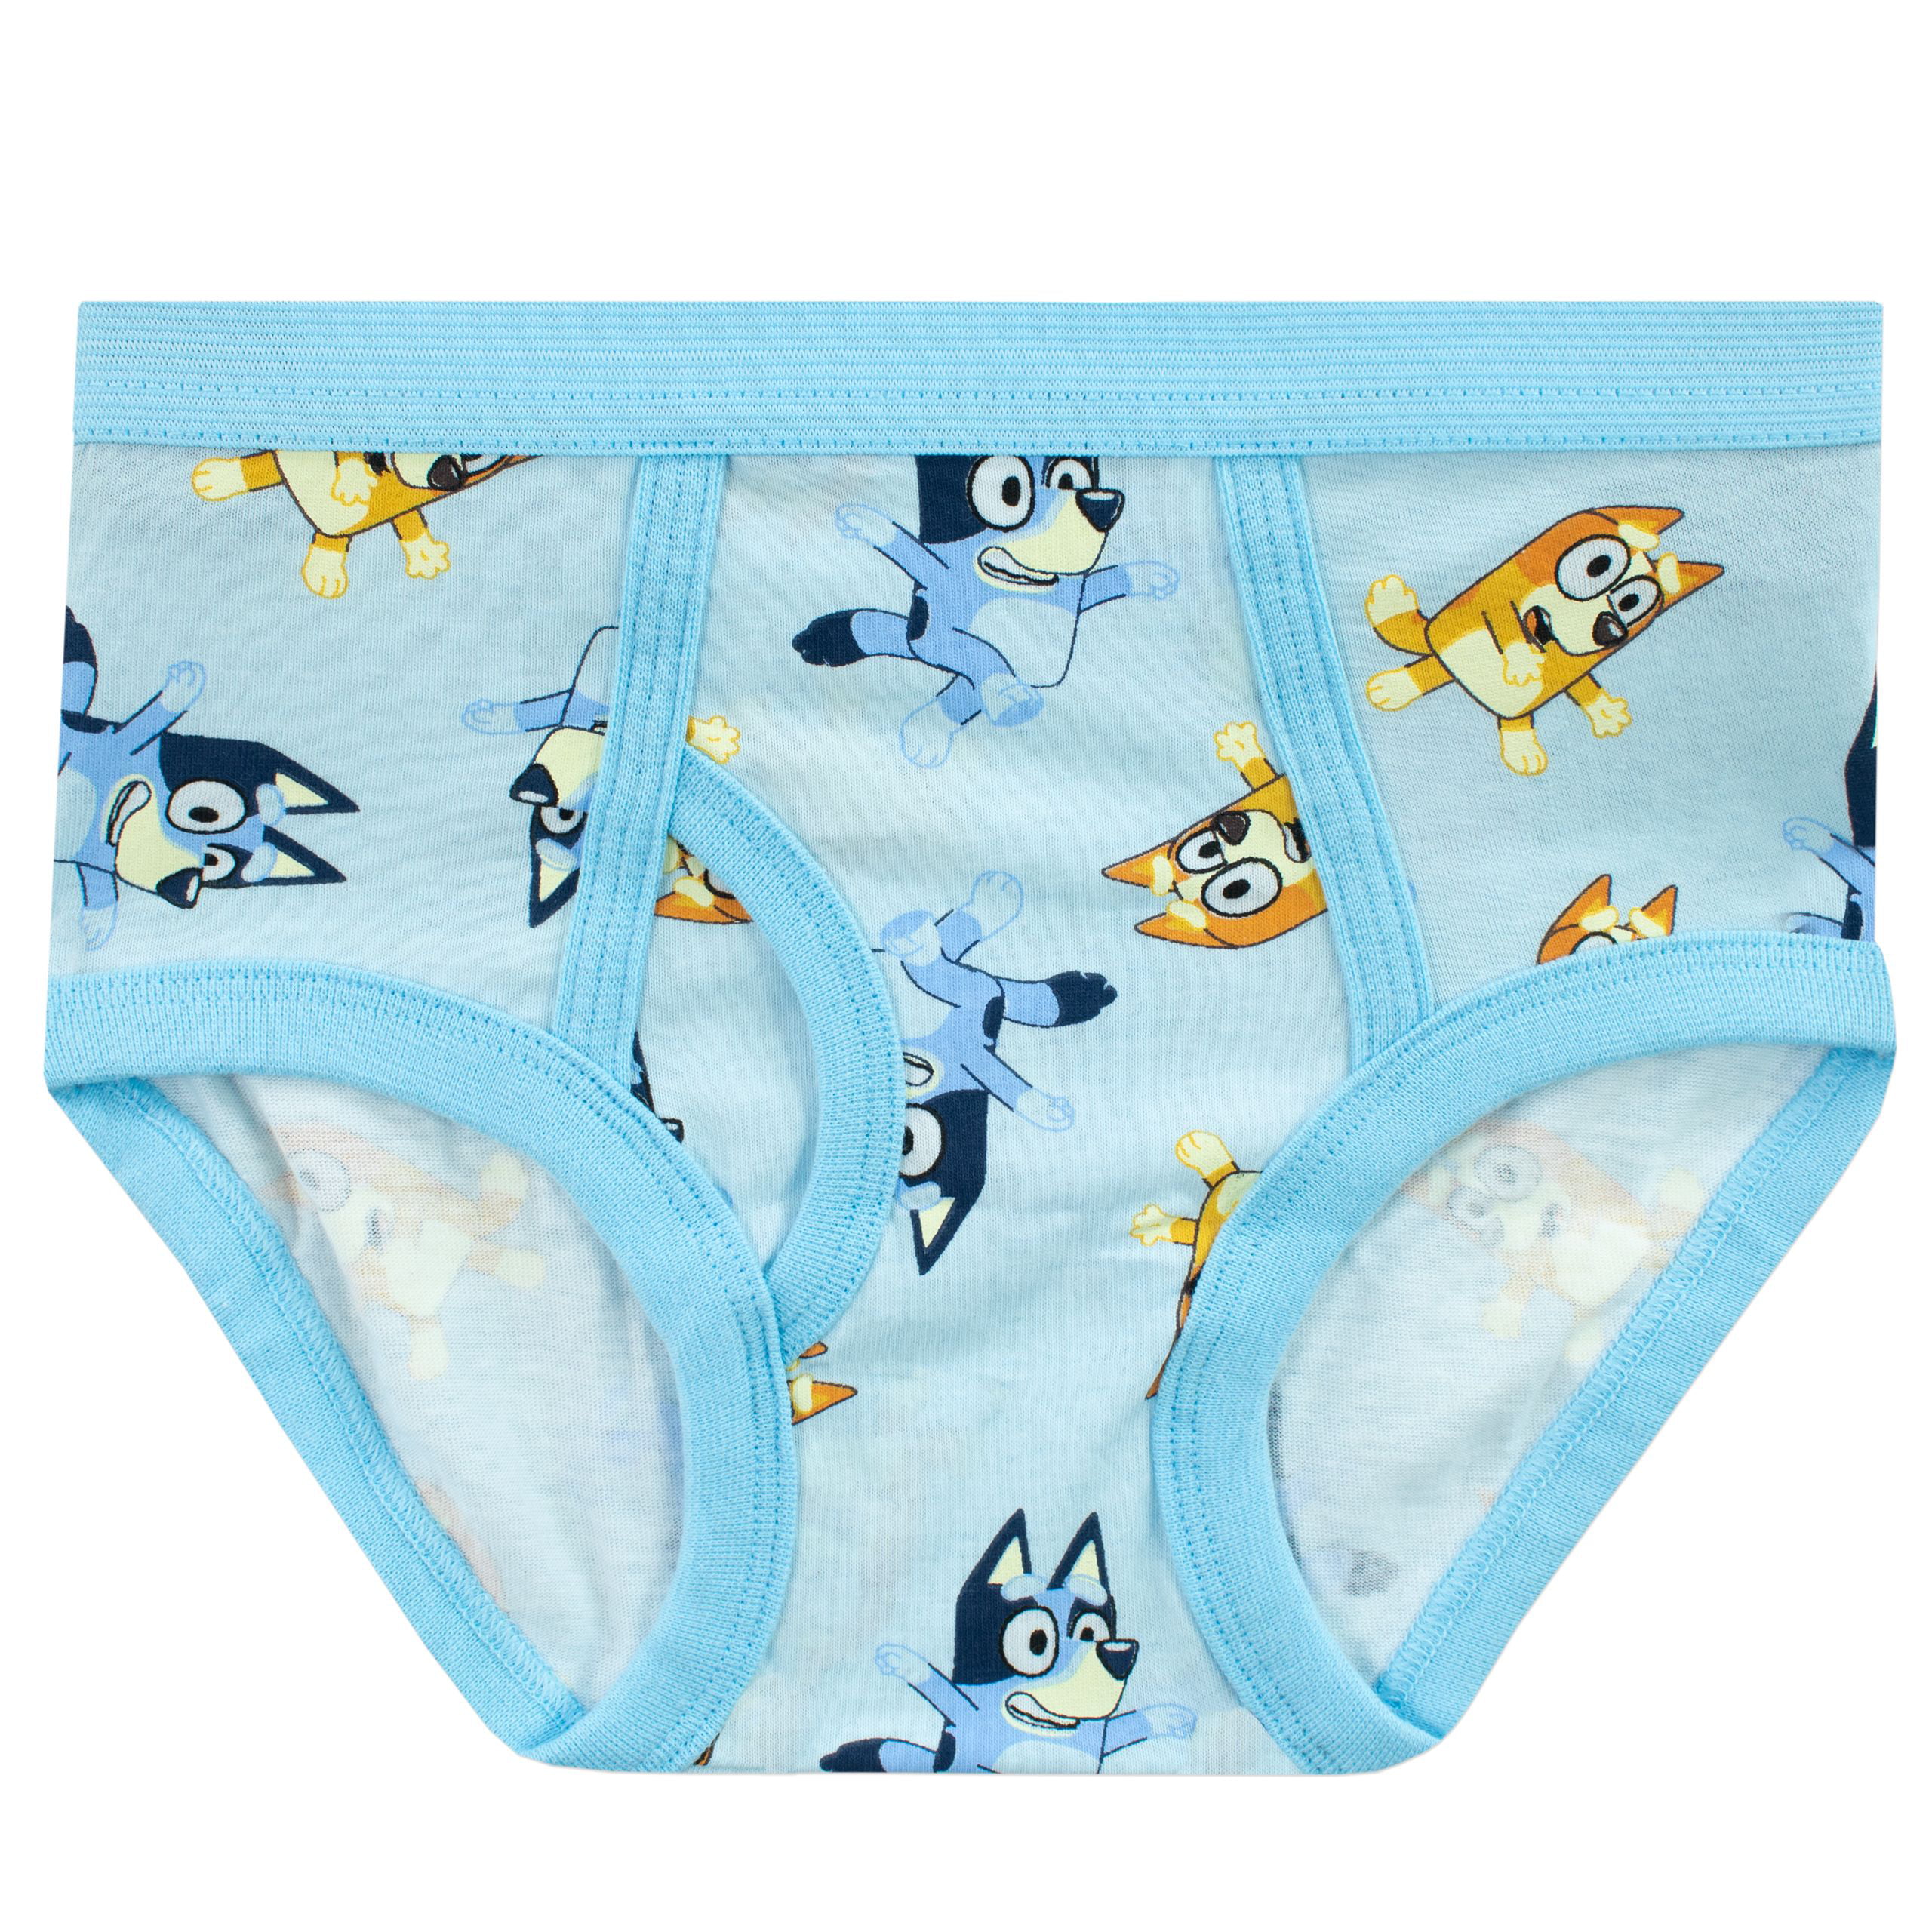 Bluey Character Briefs 5 Pack, Kids